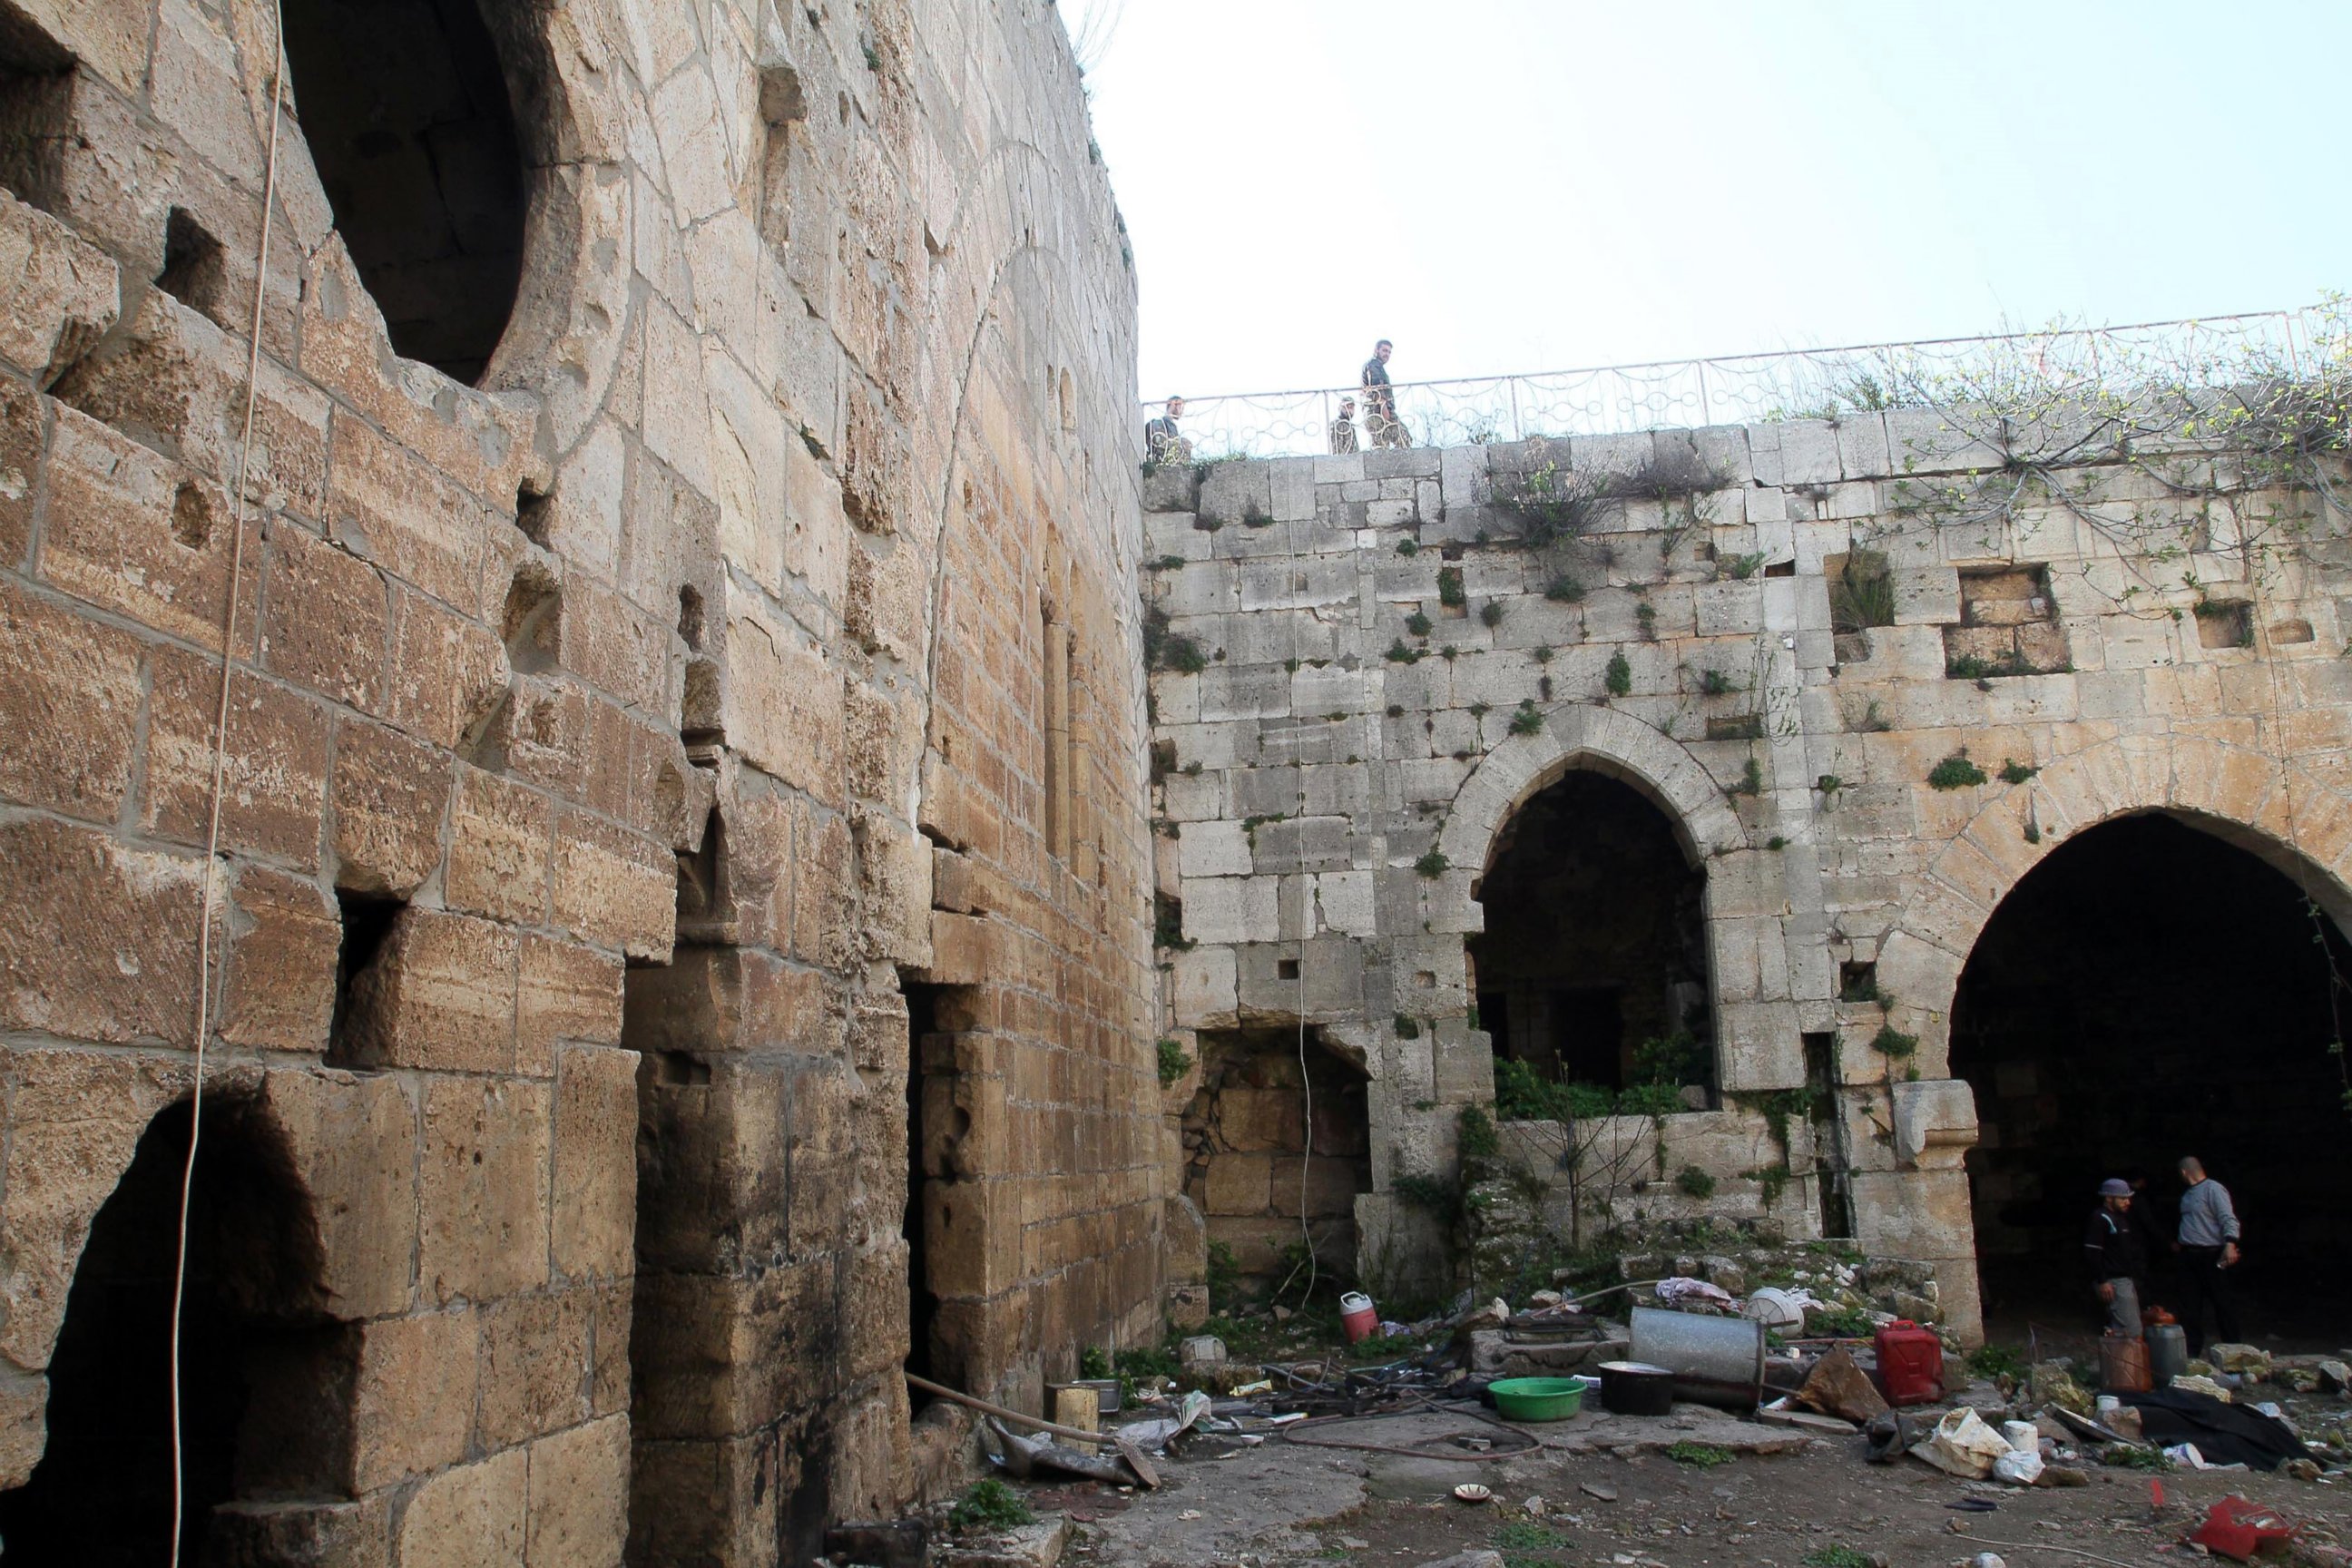 PHOTO:Syrian government forces inspect items left by rebel fighters in the famed Crusader castle, Krak de Chevaliers in the Homs region, March 21, 2014, after they recaptured the castle the previous day.  